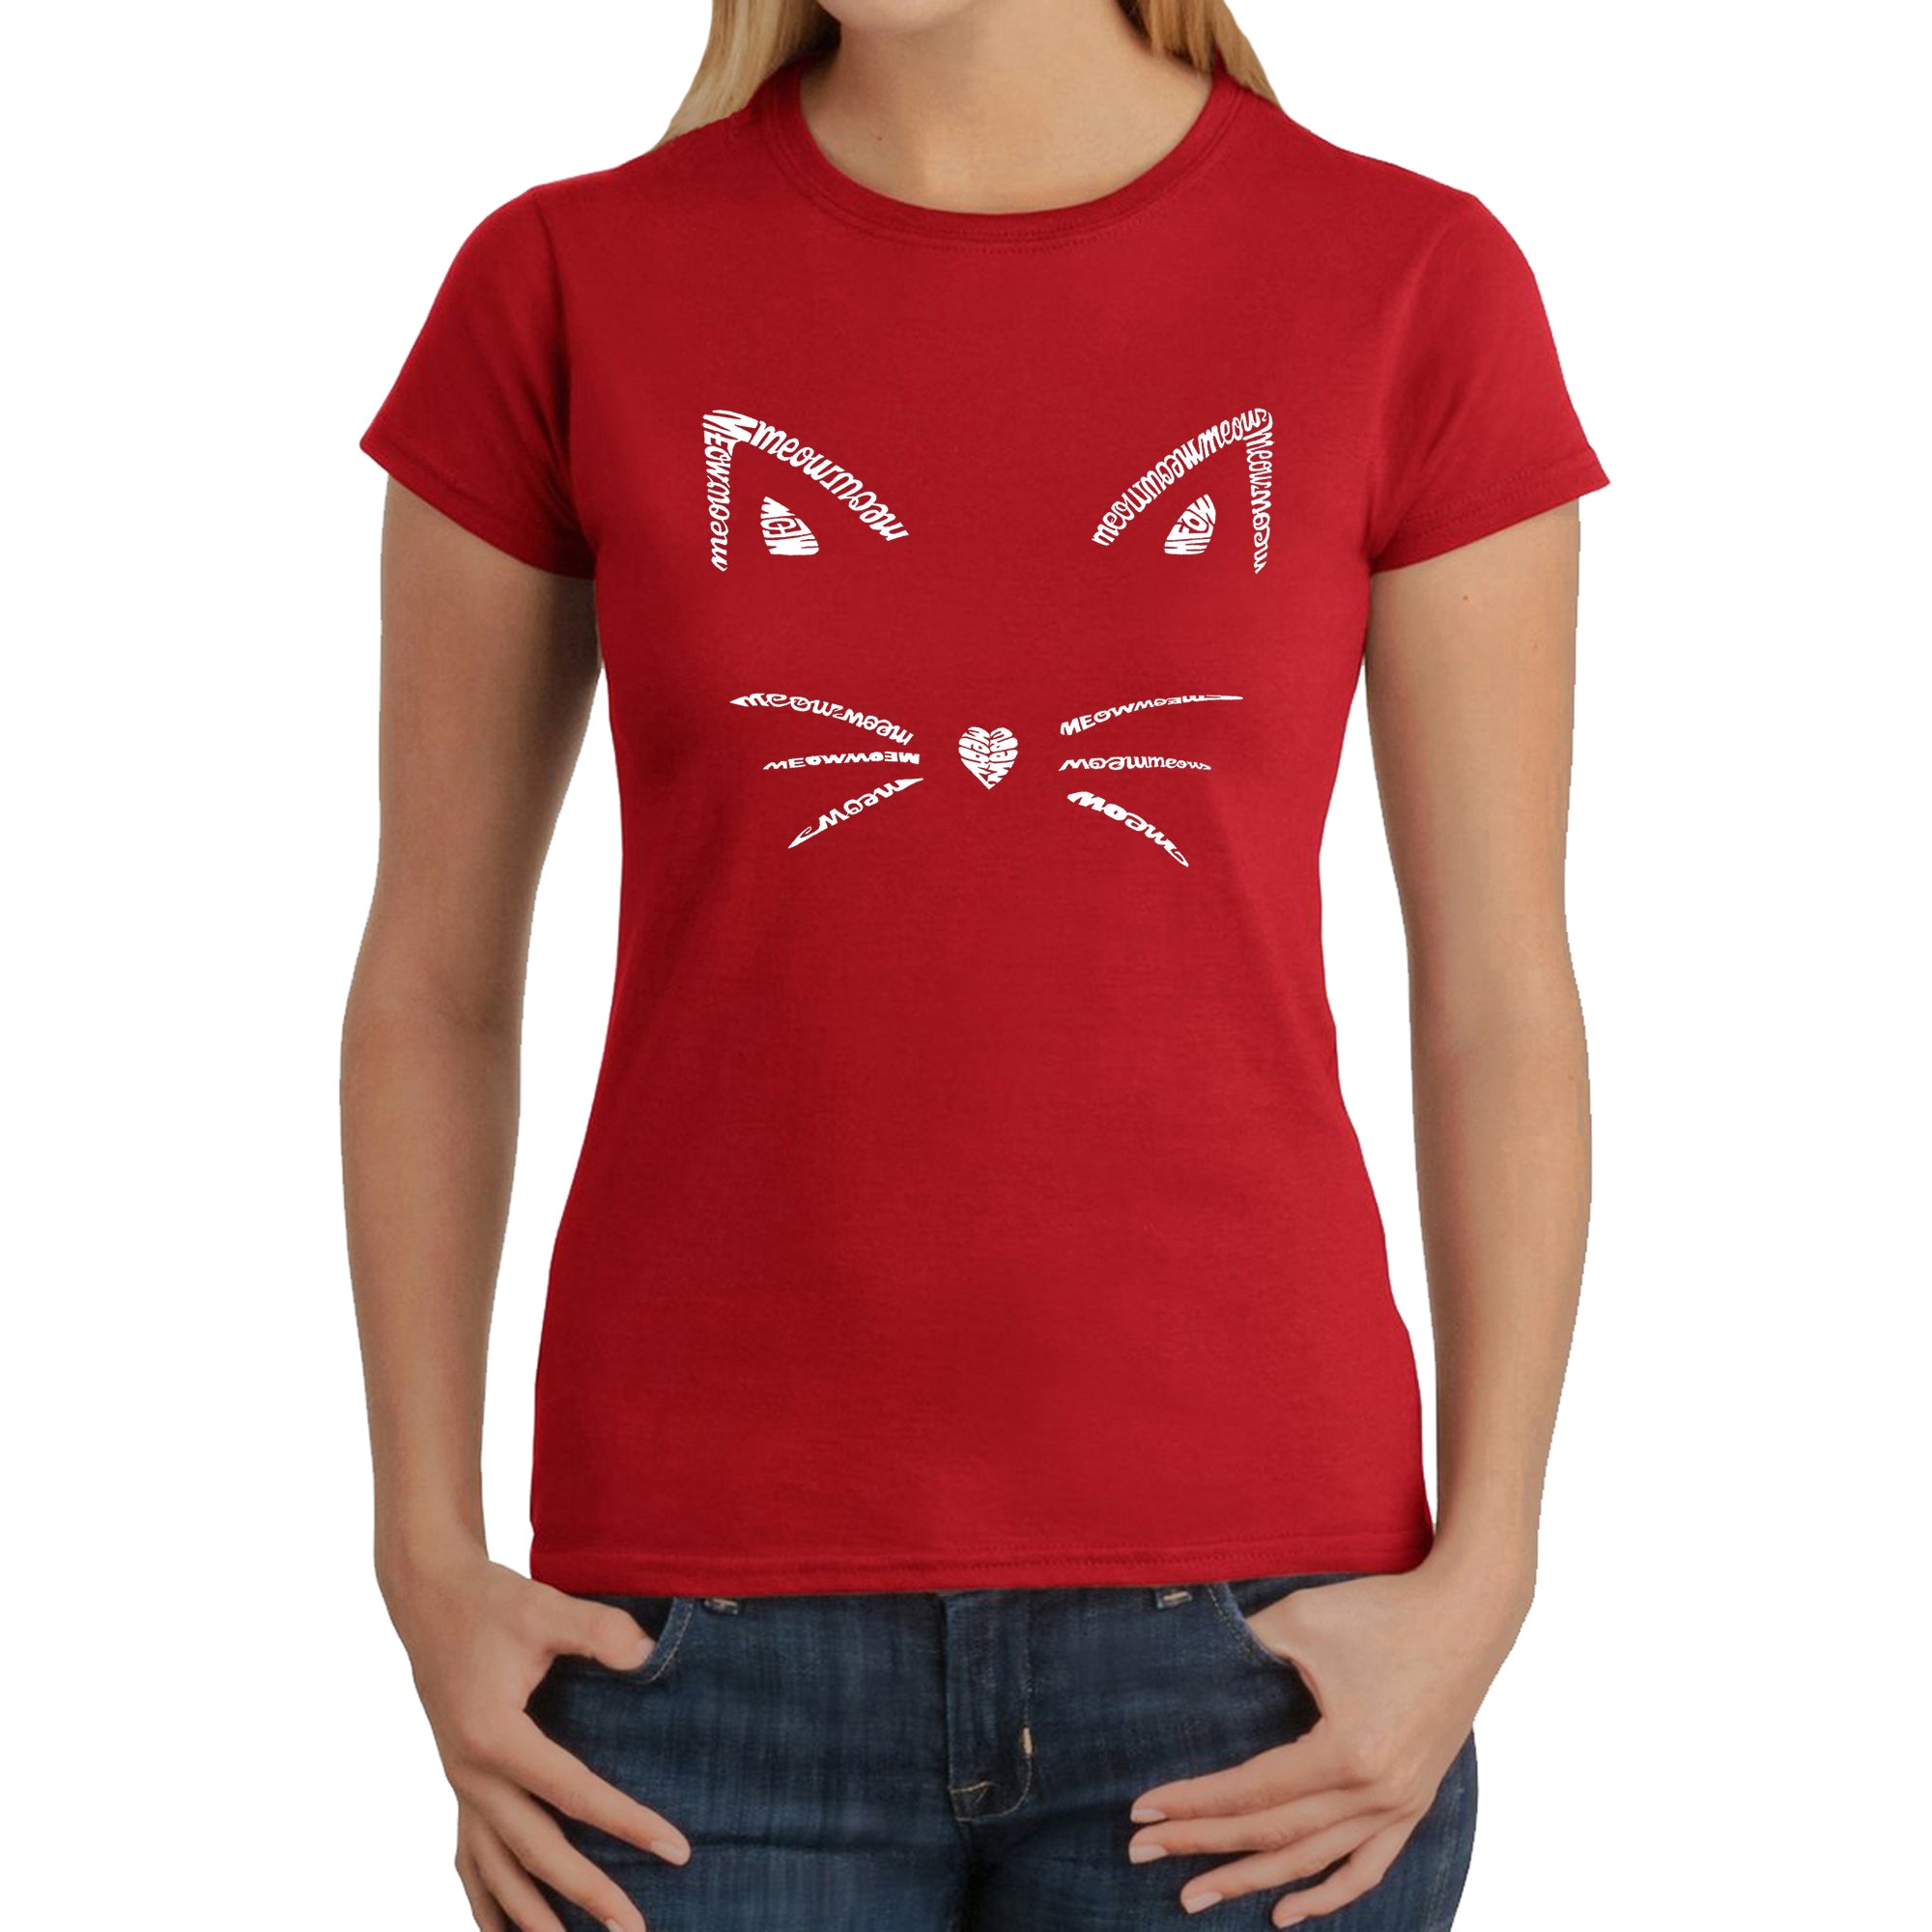 Whiskers - Women's Word Art T-Shirt - Red - Large